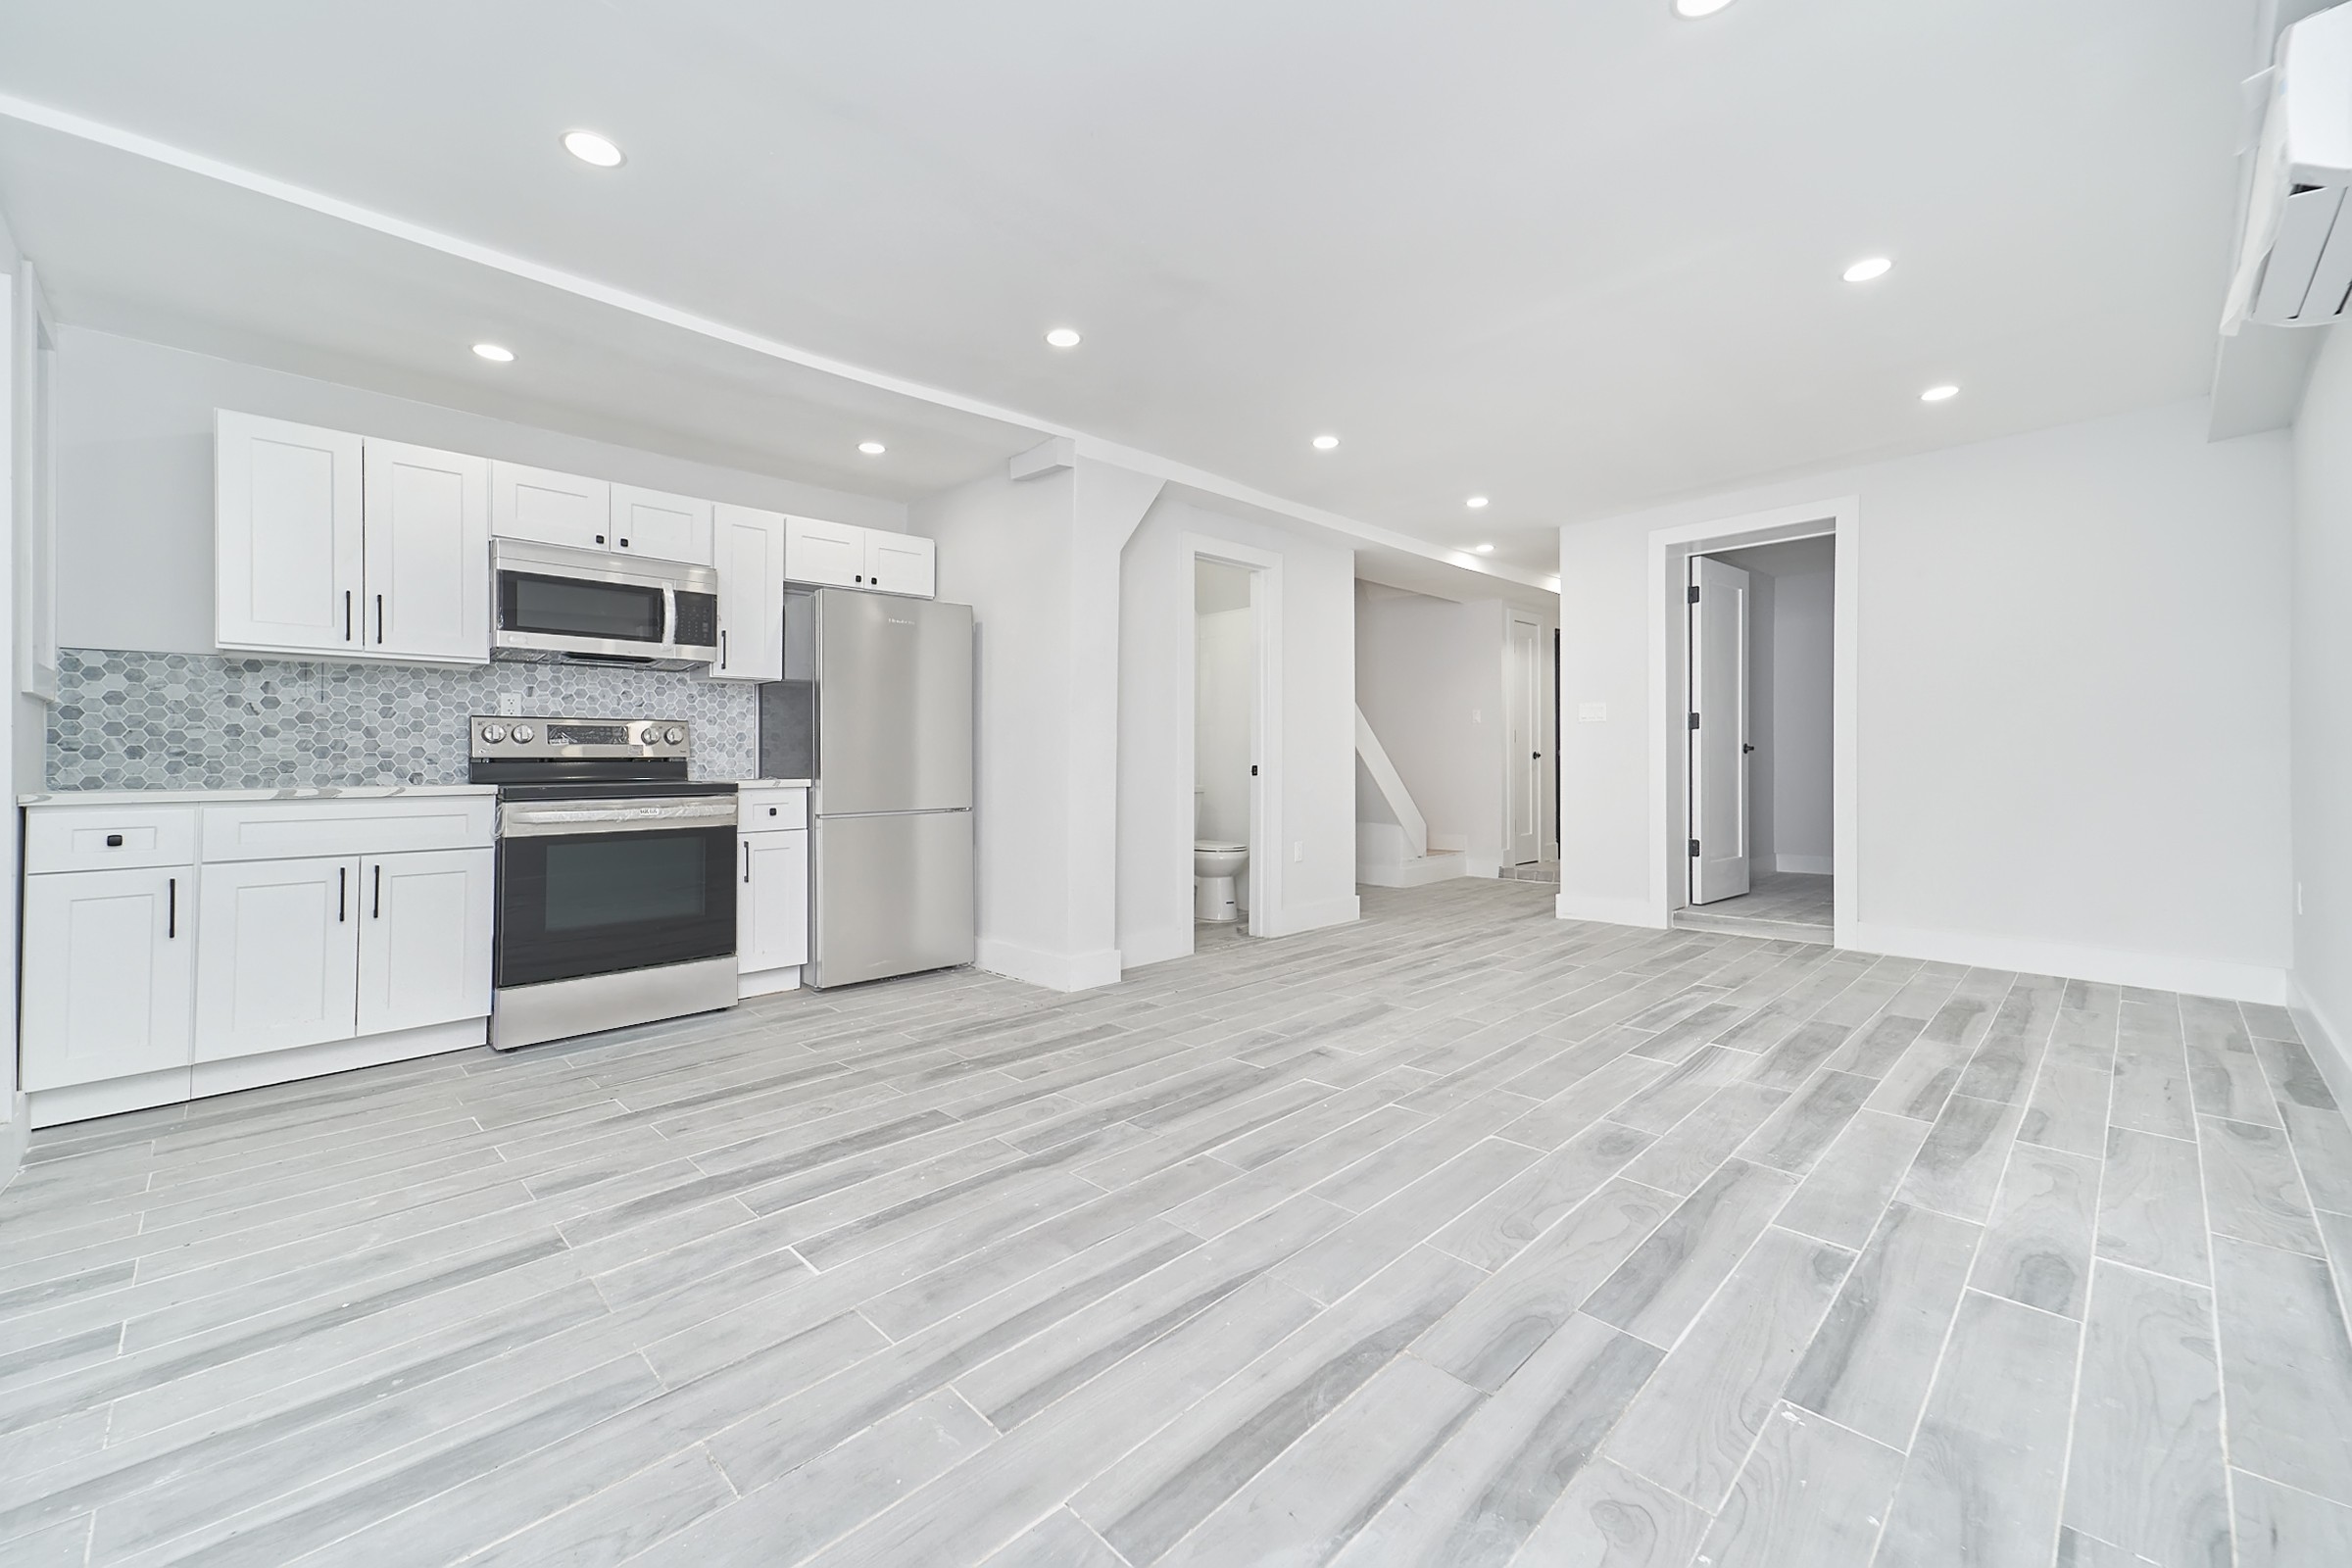 759 Maple Street - House For Sale in Crown Heights